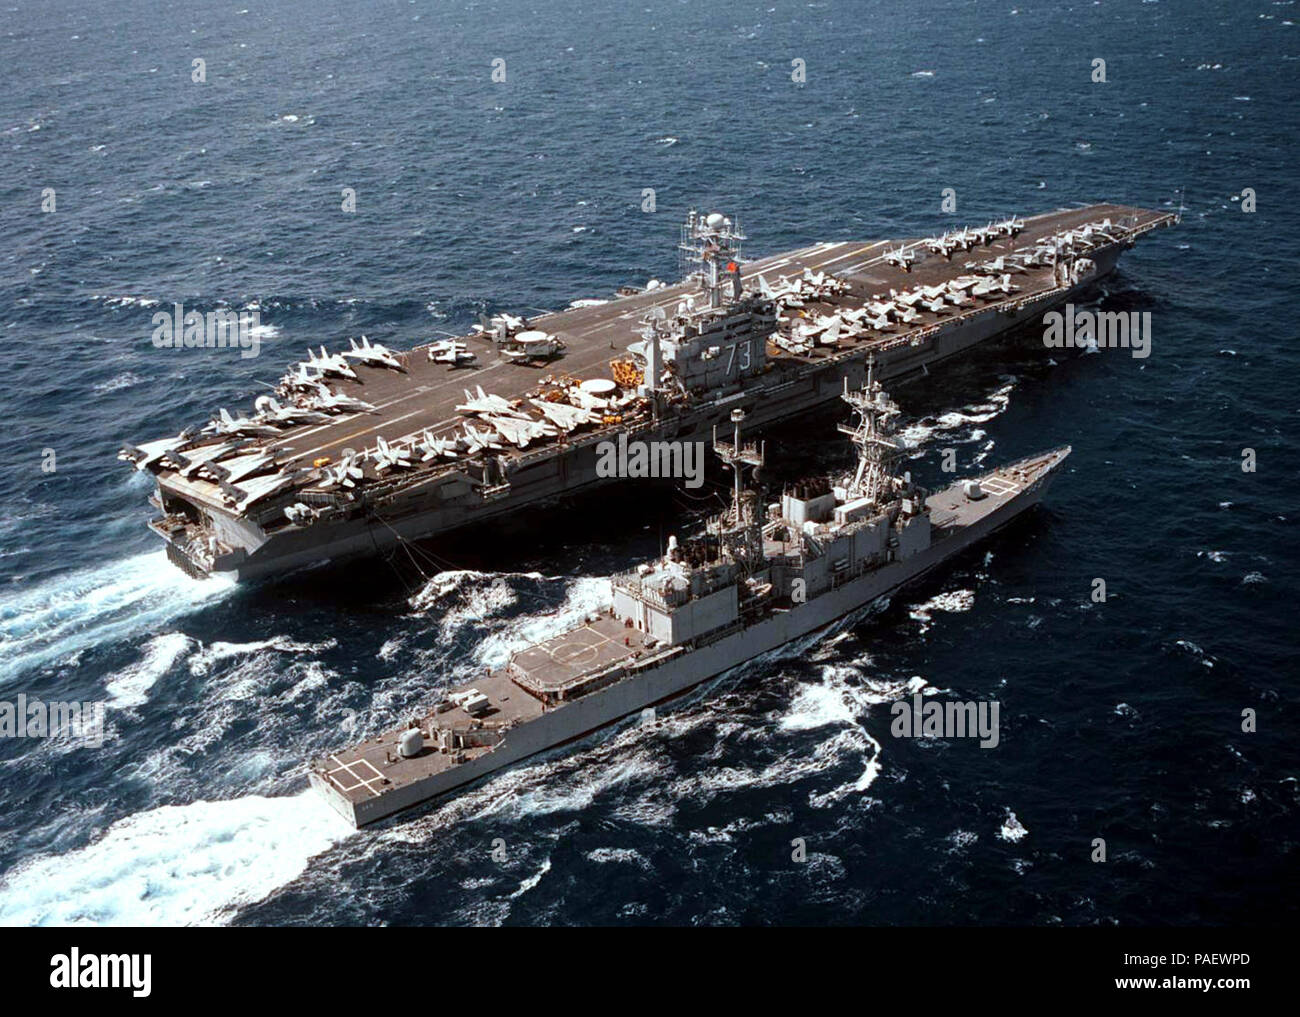 U.S. Navy's nuclear powered aircraft carrier USS George Washington (CVN 73) and guided missile destroyer USS Arthur W. Radford (DDG 968) conduct replenishment at sea operations in the western Mediterranean Sea, July 11, 1996.  Both vessels are nearing the completion of a scheduled six-month deployment. George Washington's battle group has sustained operations in support of the NATO-led peace keeping efforts in Bosnia under Operation Decisive Endeavor in the Adriatic Sea, and UN sponsored sanctions against Iraq, under Operation Southern Watch in the Arabian Gulf.  U.S. Navy Stock Photo